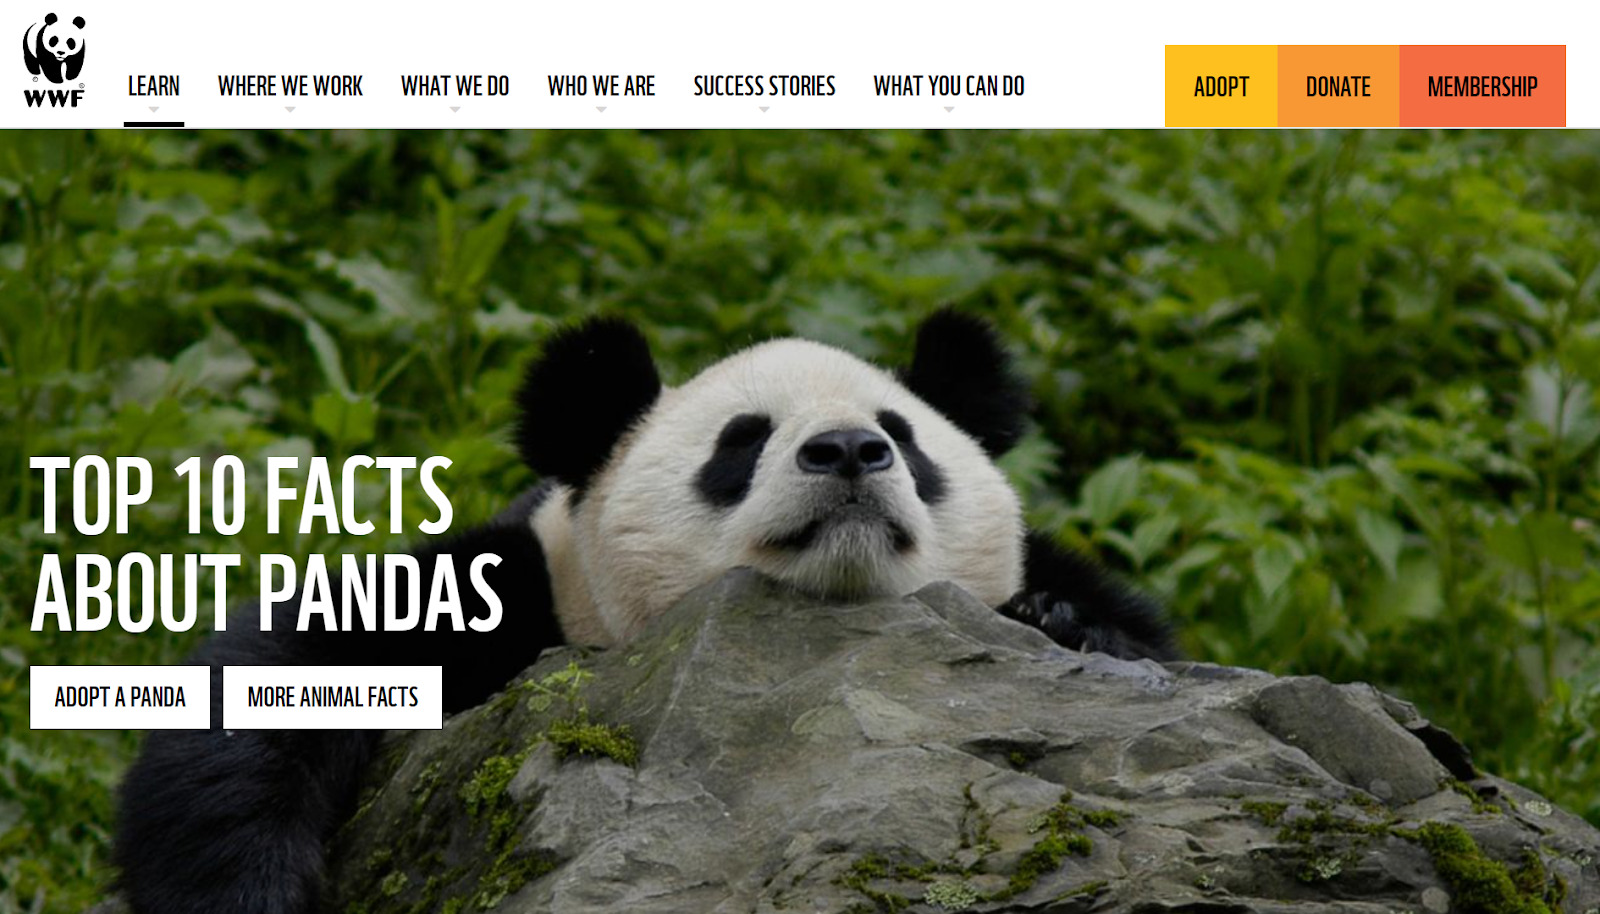 Excerpt of WWF article on 10 facts about pandas; picture of panda resting on a rock with lush greenery as a backdrop